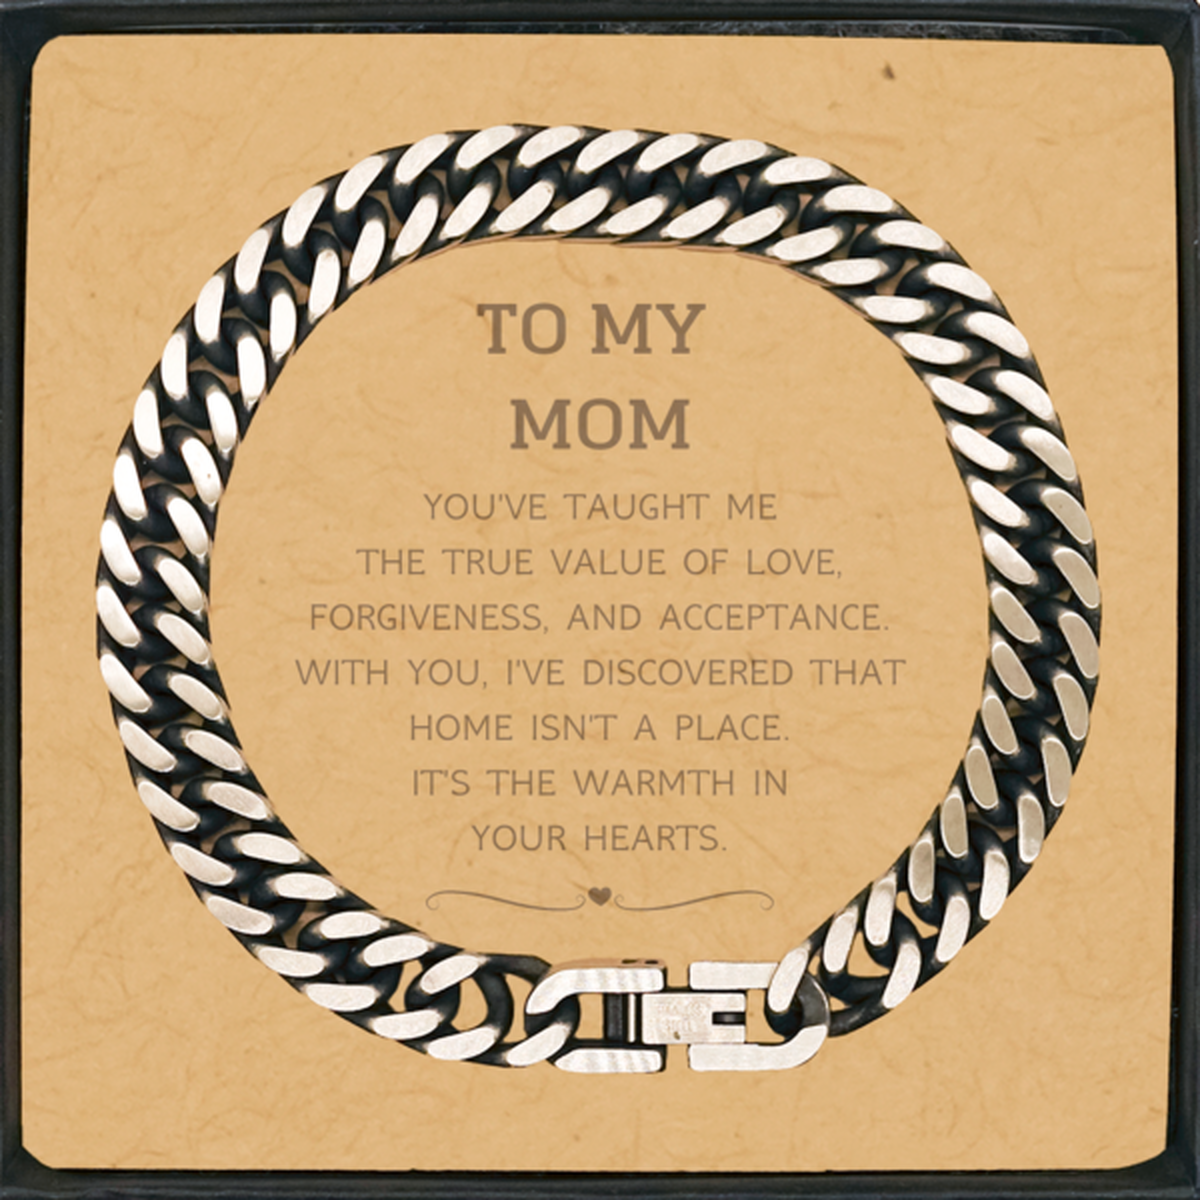 To My Mom Gifts, You've taught me the true value of love, Thank You Gifts For Mom, Birthday Cuban Link Chain Bracelet For Mom